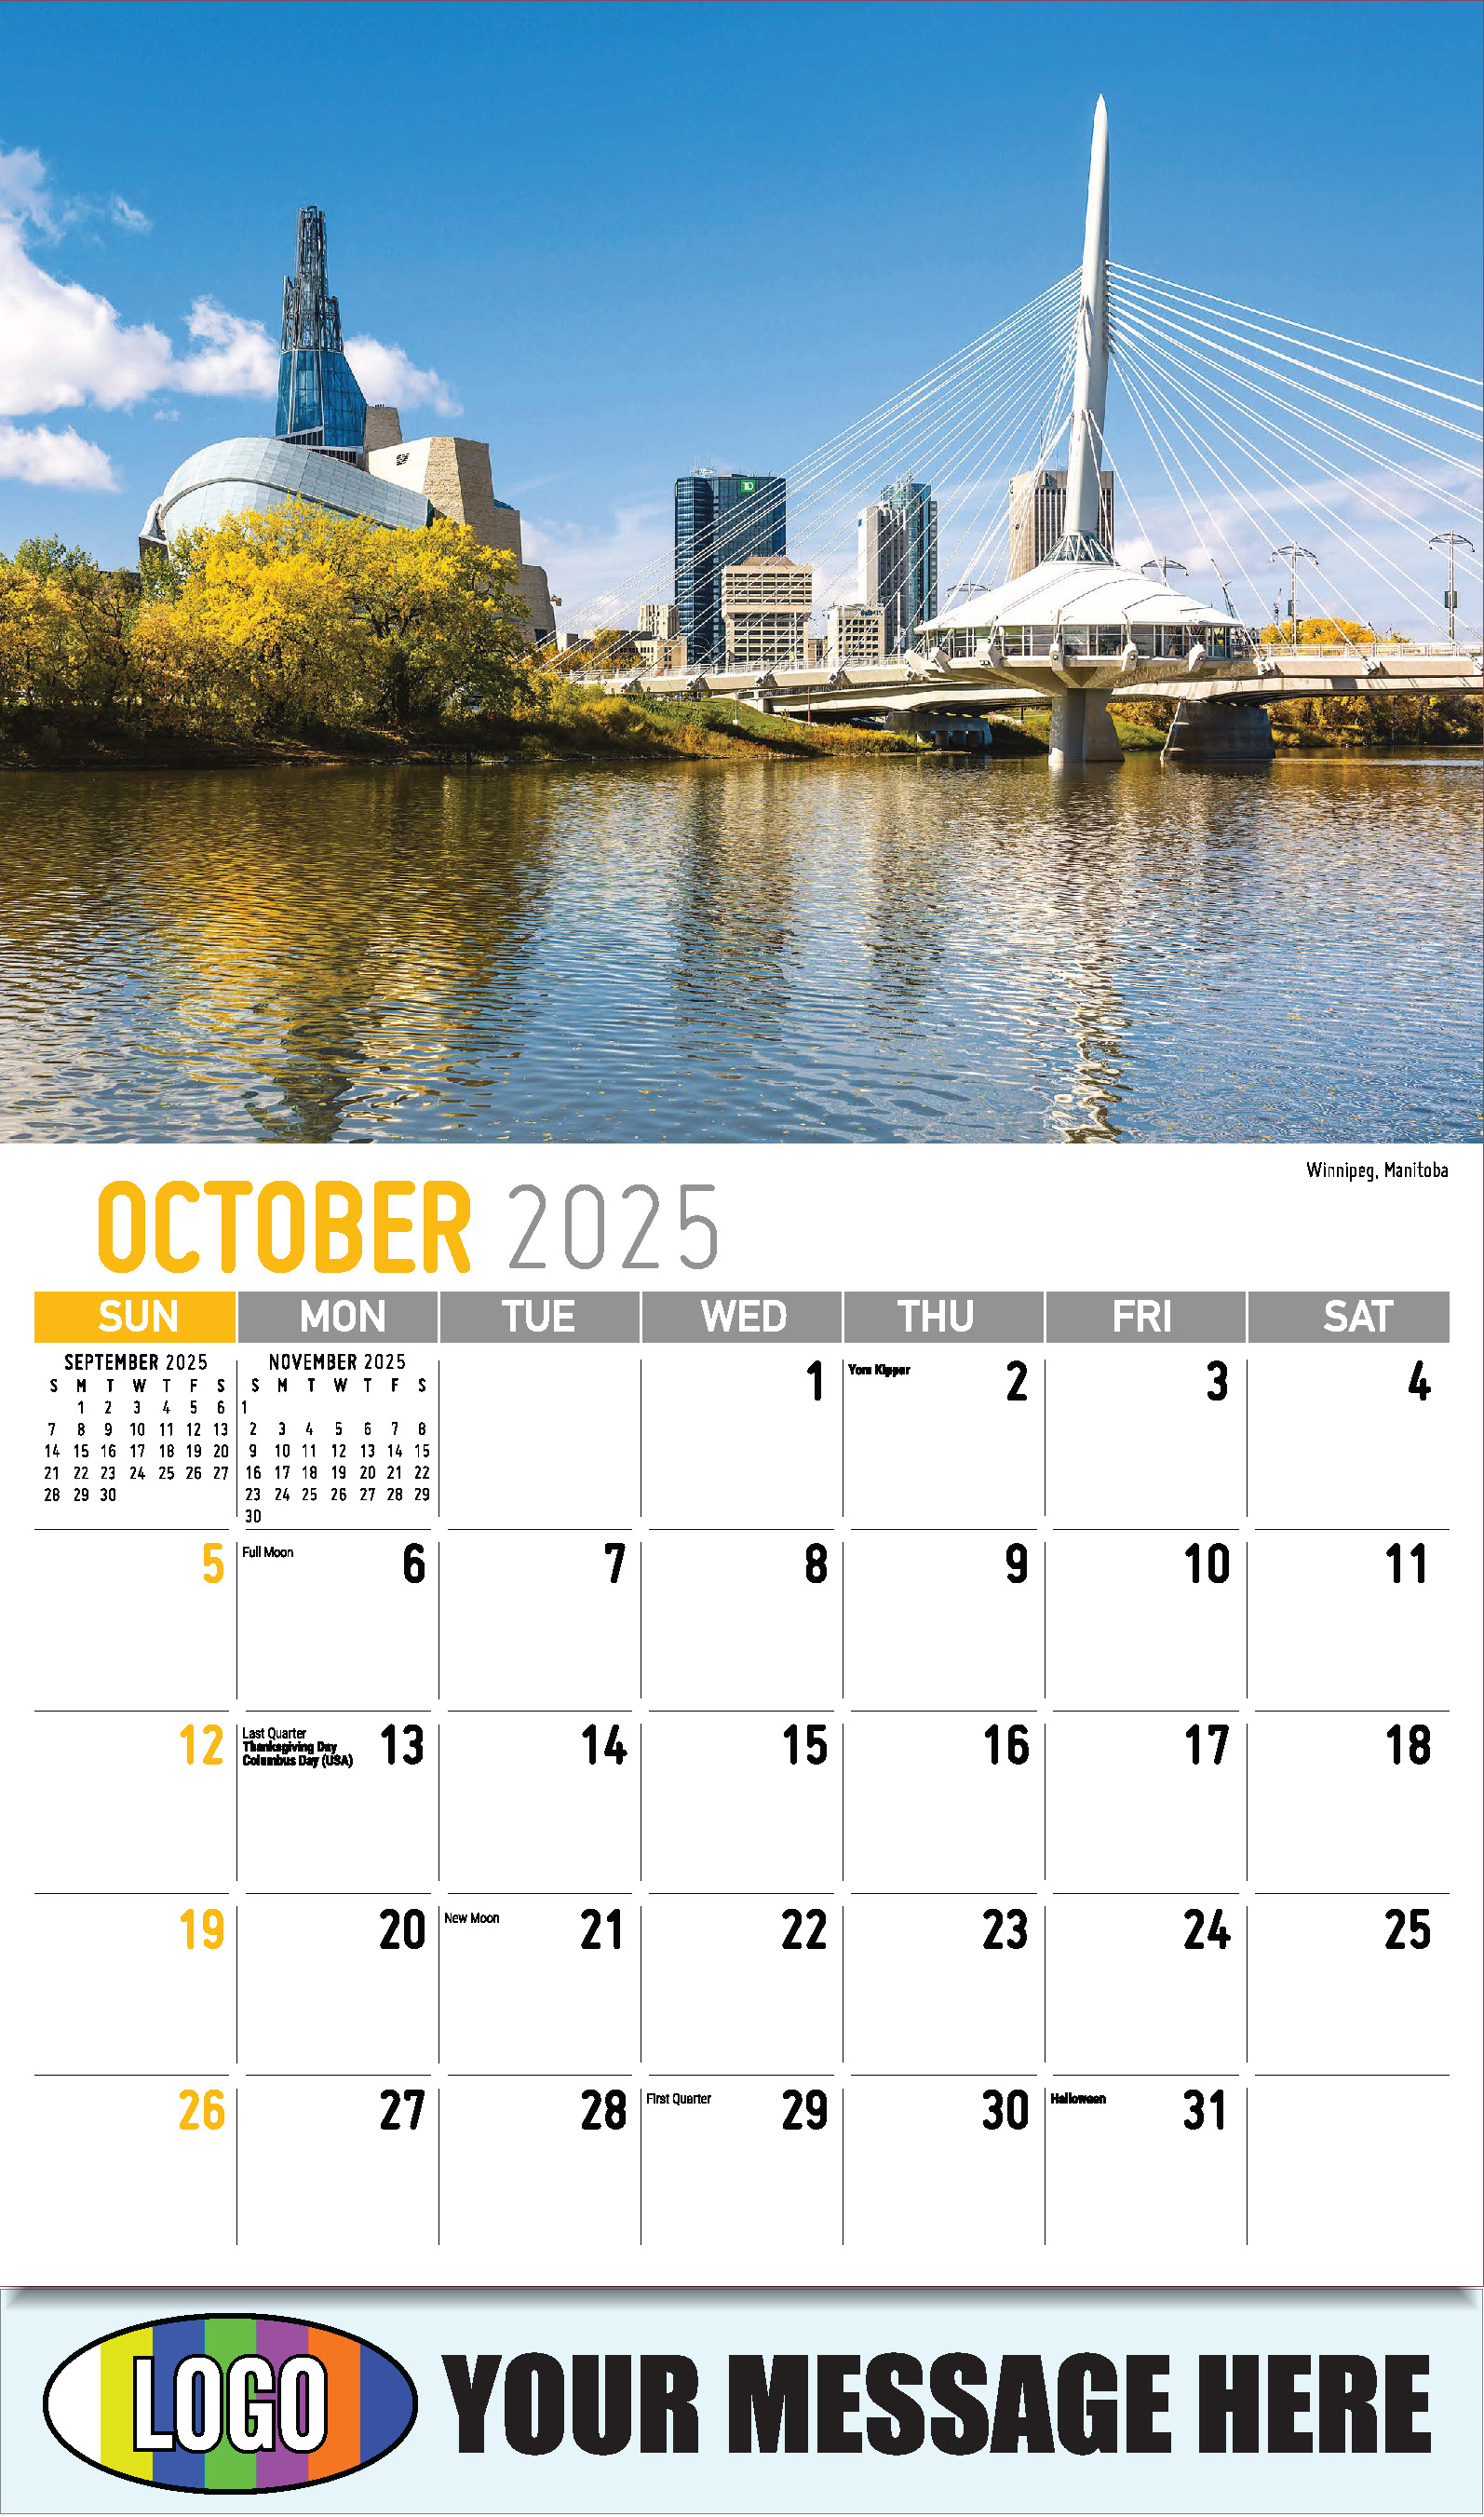 Scenes of Western Canada 2025 Business Promotional Wall Calendar - October